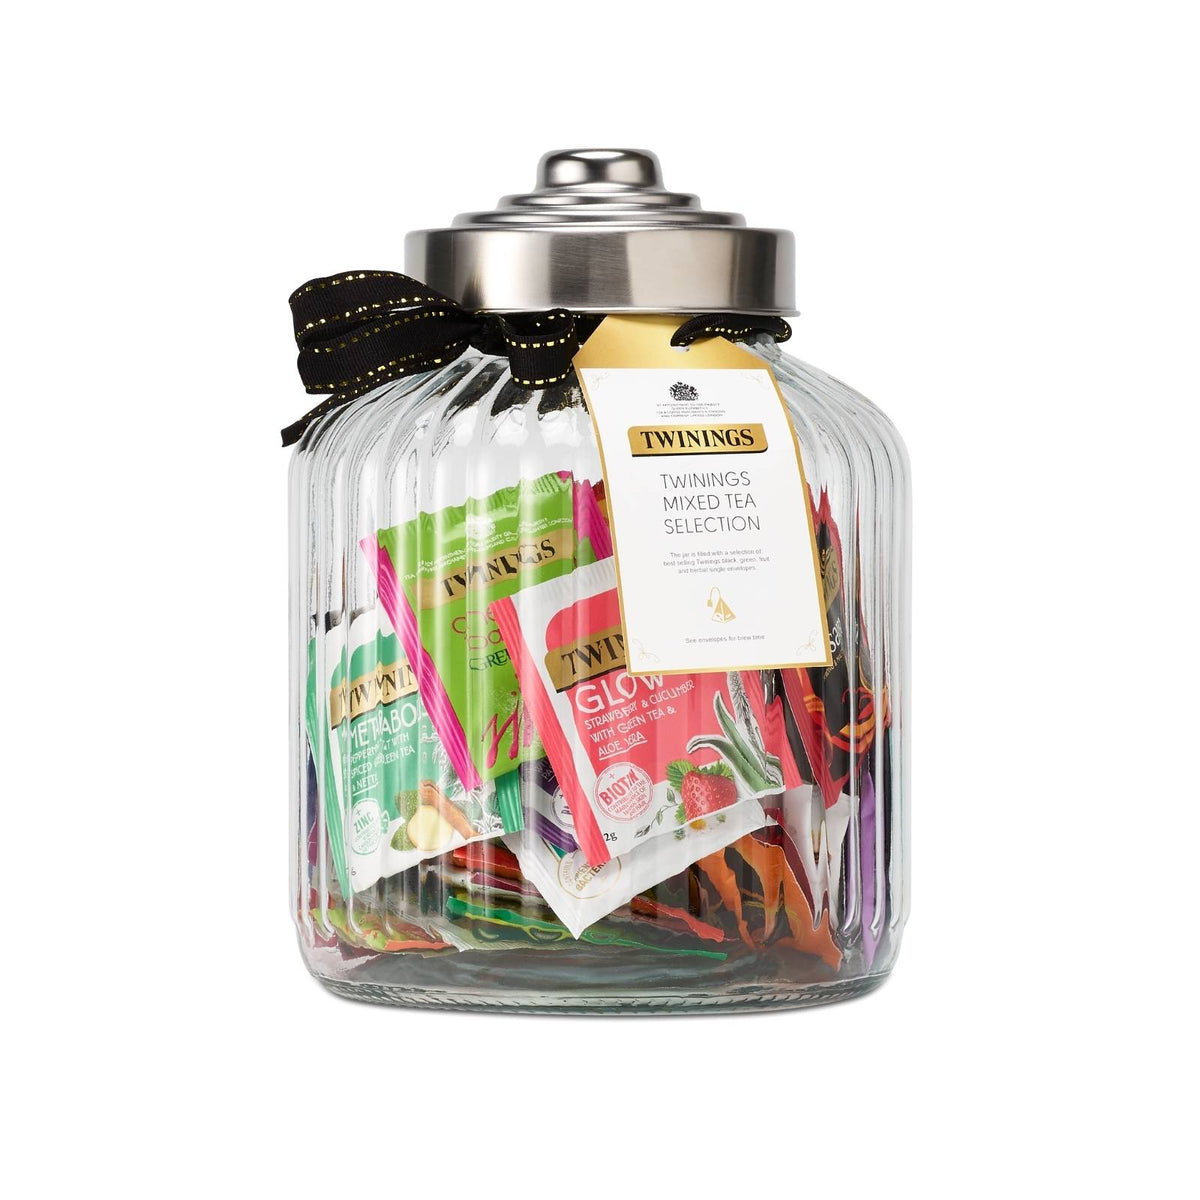 Mixed Tea & Infusions Selection Filled Jar